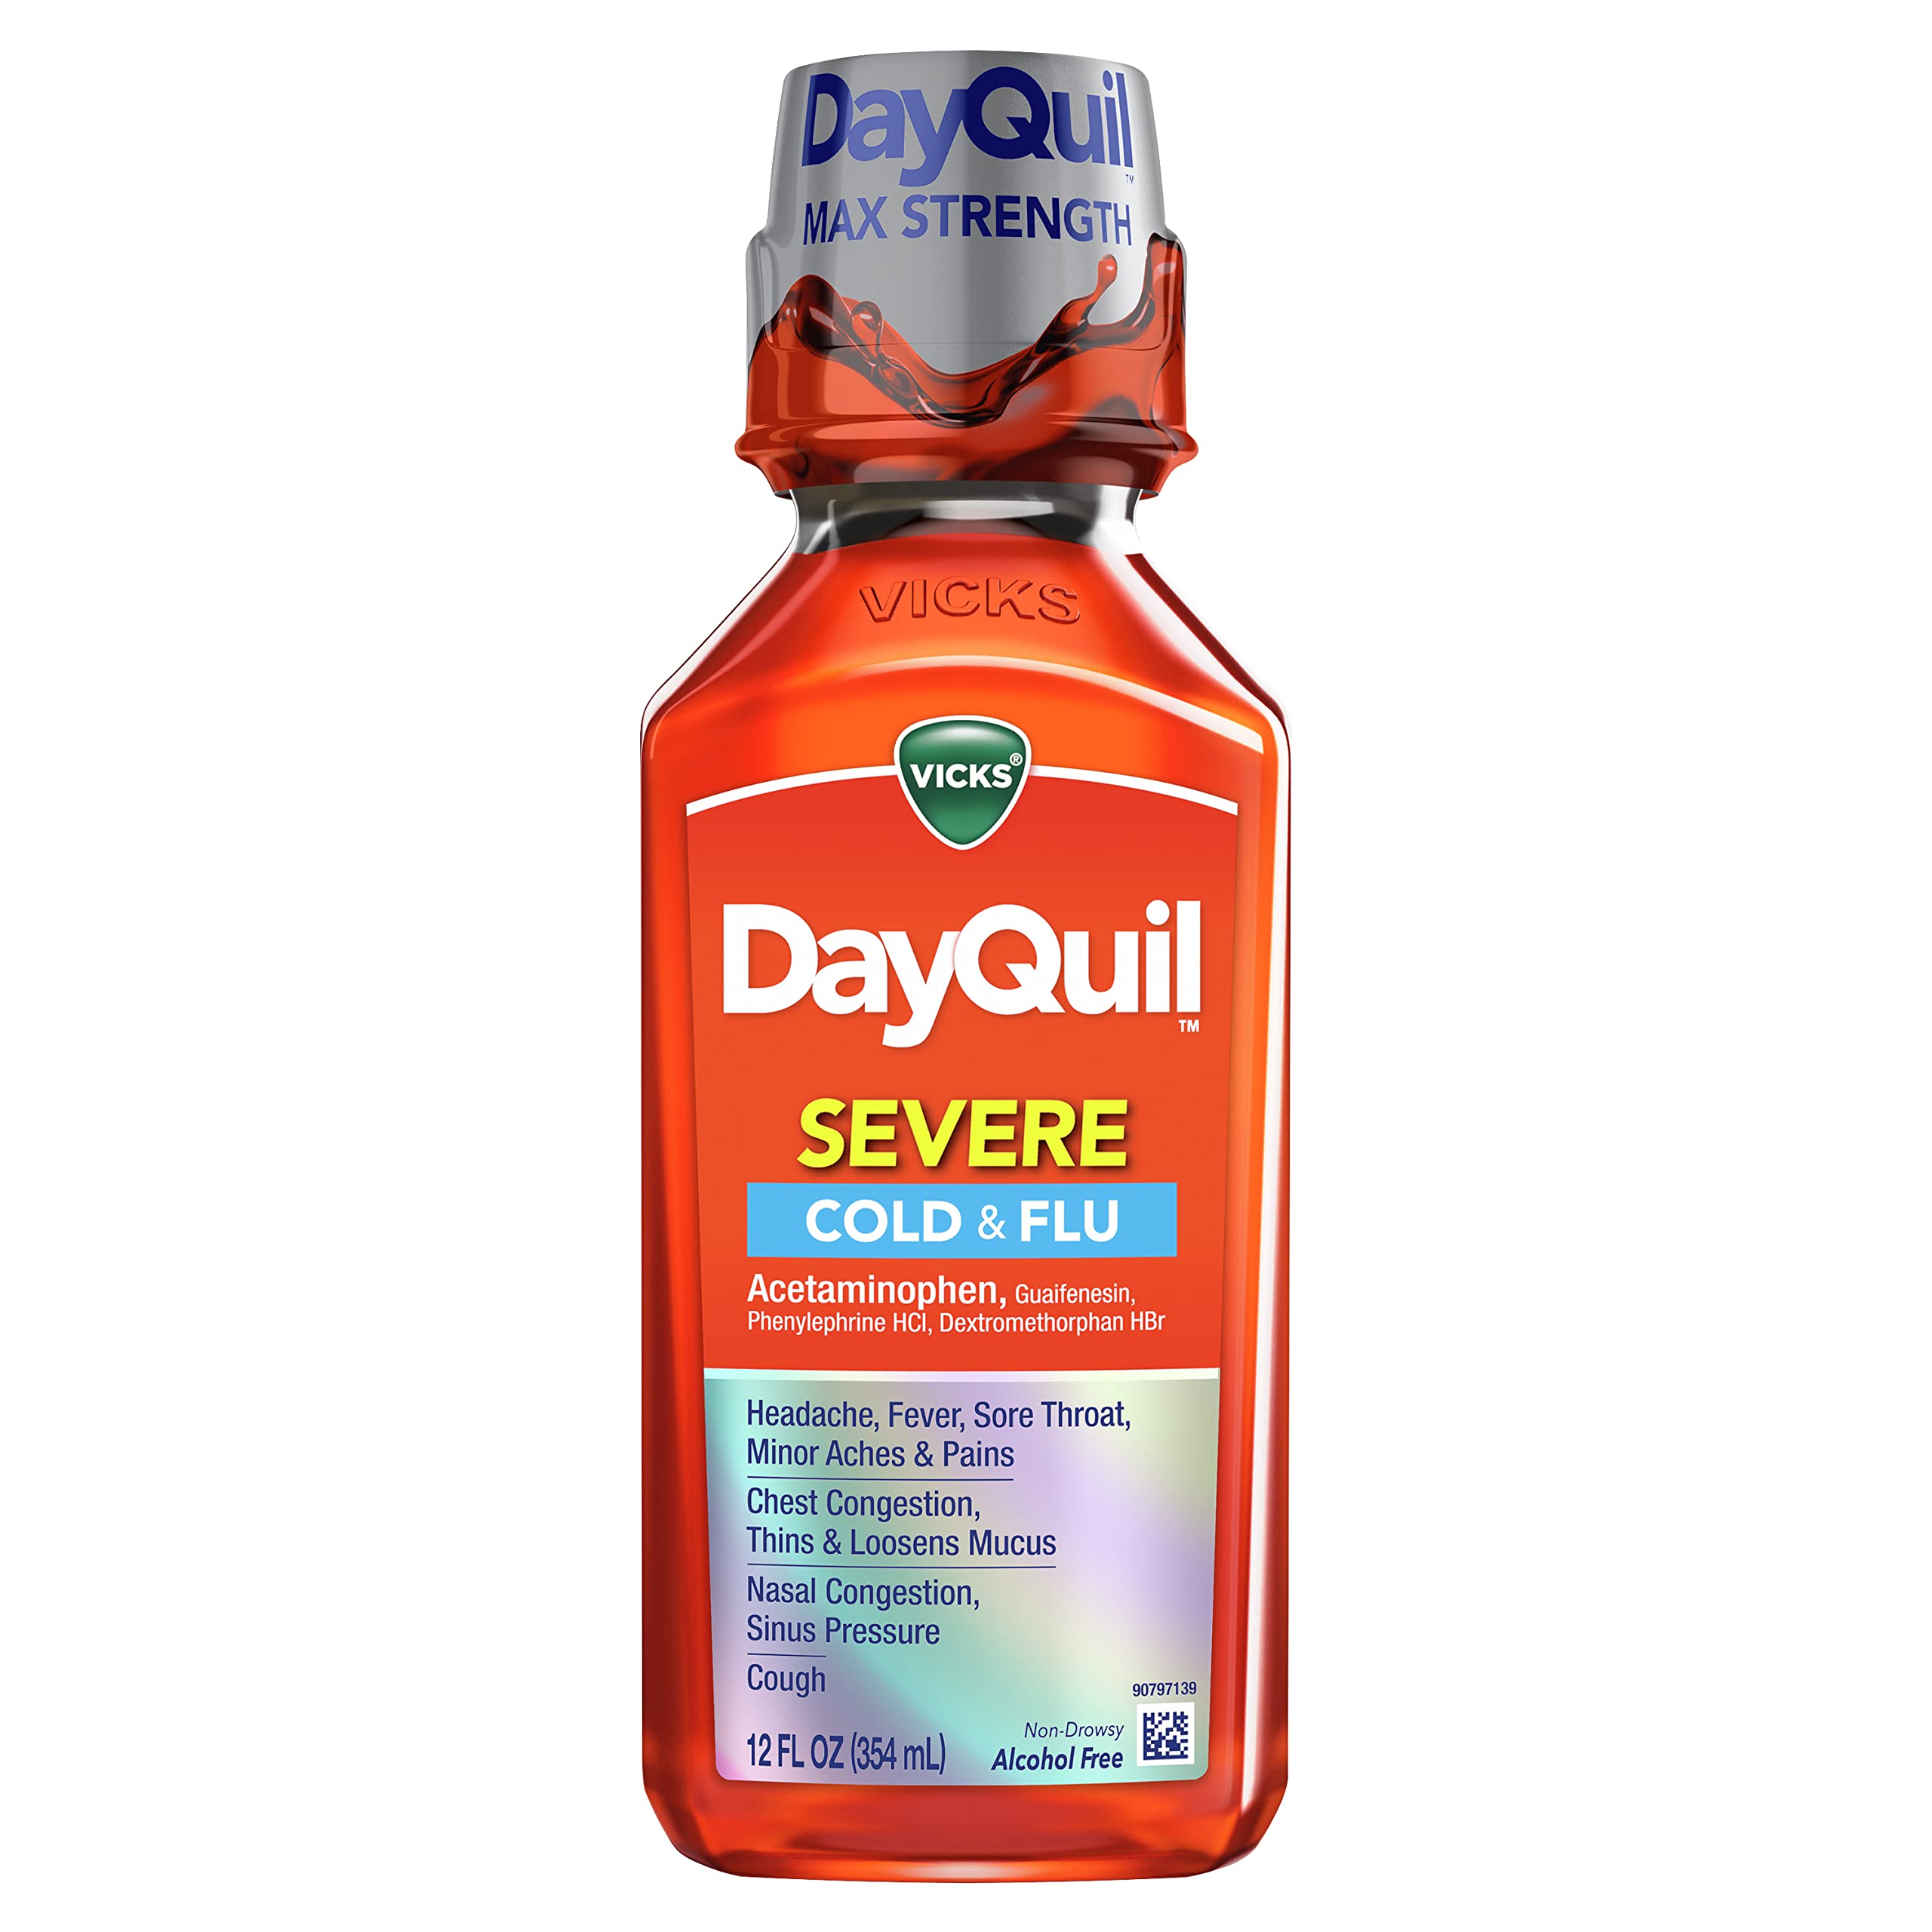 Vicks DayQuil Severe Cough, Cold and Flu, Berry Flavor, 12 Fl oz (Non-Drowsy) - Sore Throat, Fever, and Congestion Relief (Pack of 2)